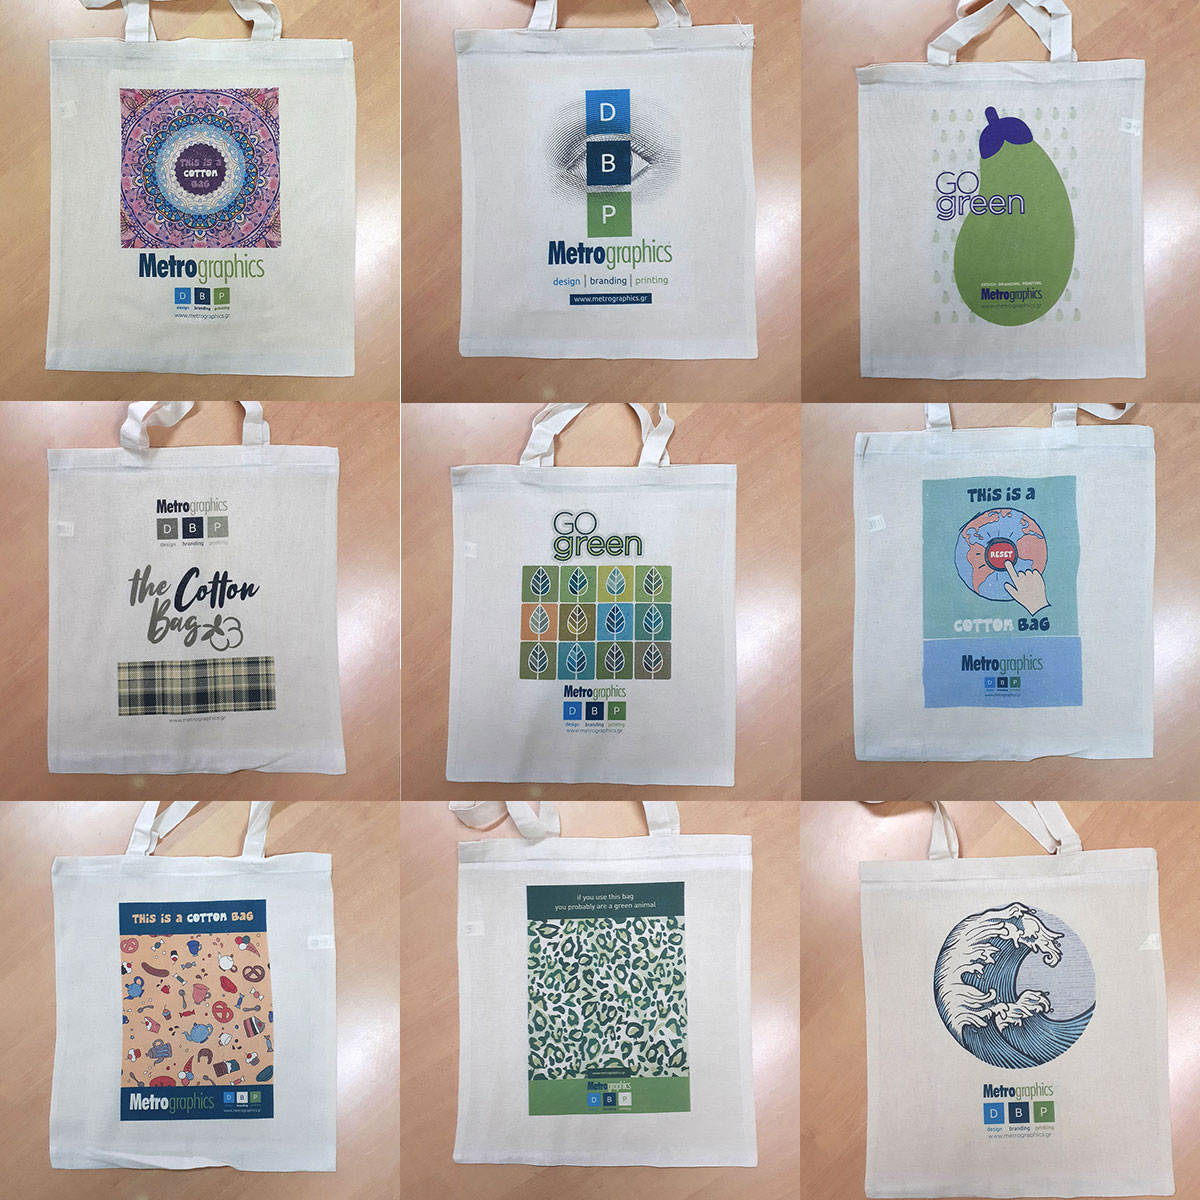 "Green" bags for those who pass by our offices these days